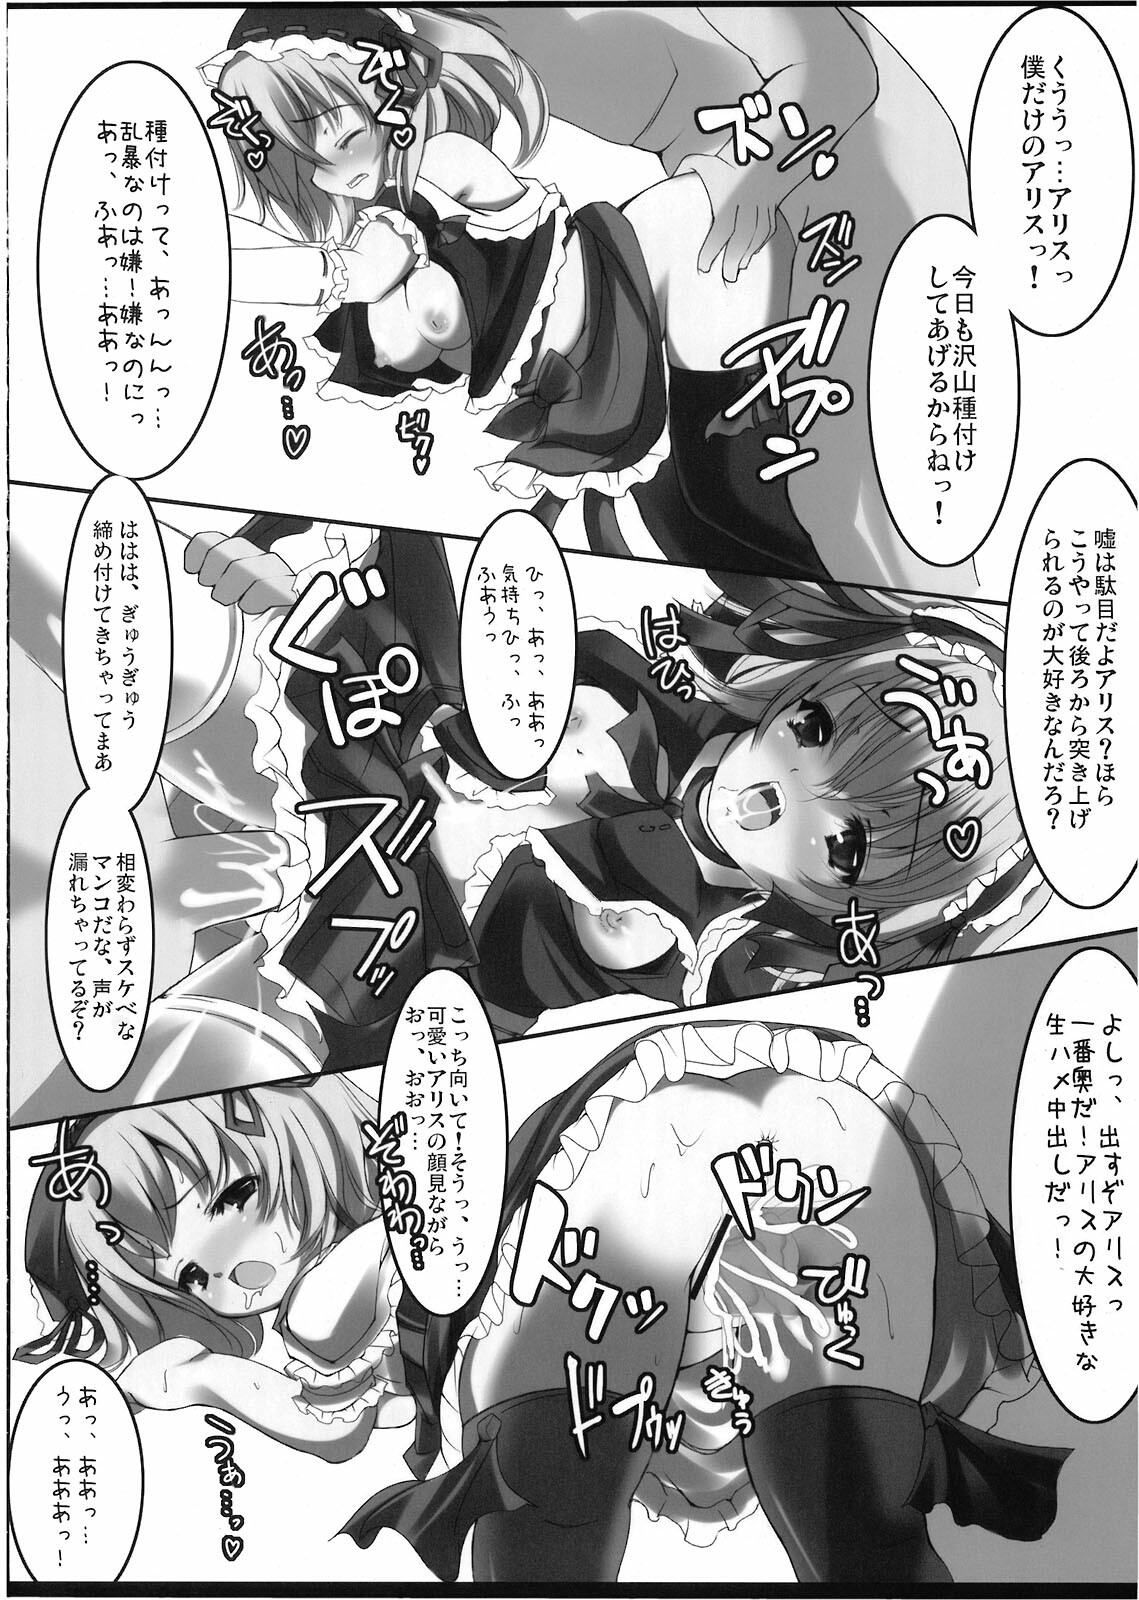 [EARNESTLY JET CITY] 幻想郷 爆!! (Touhou) page 24 full